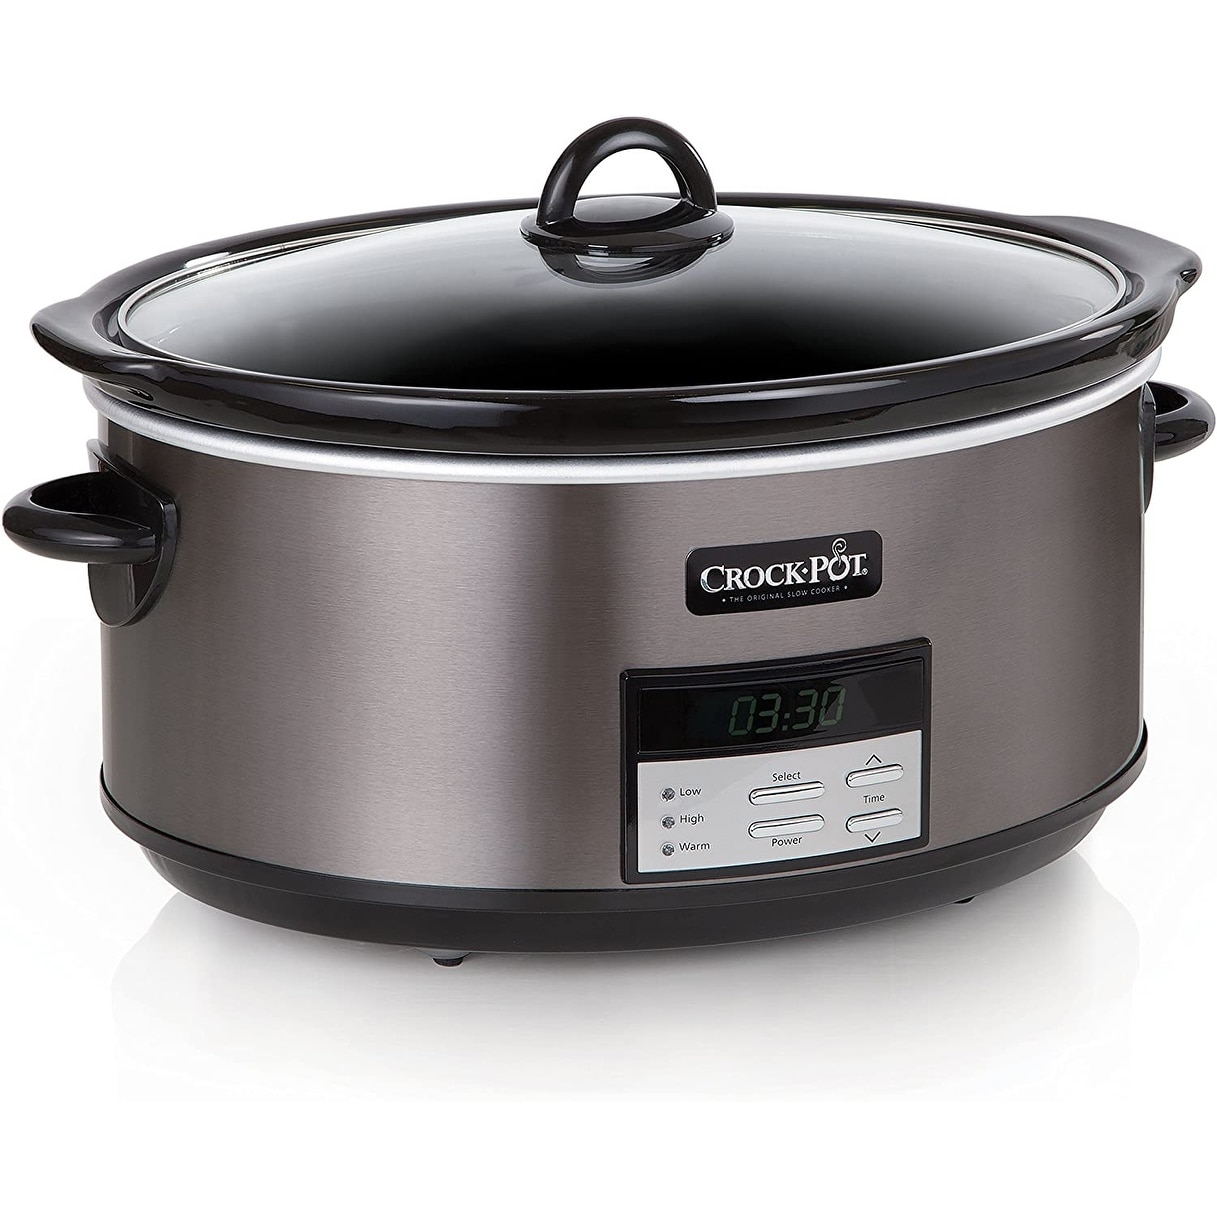 https://ak1.ostkcdn.com/images/products/is/images/direct/59275f7a926dc05294106cda979a321132a37b24/8-Quart-Slow-Cooker-with-Auto-Warm-Setting-and-Cookbook%2C-Black-Stainless-Steel.jpg